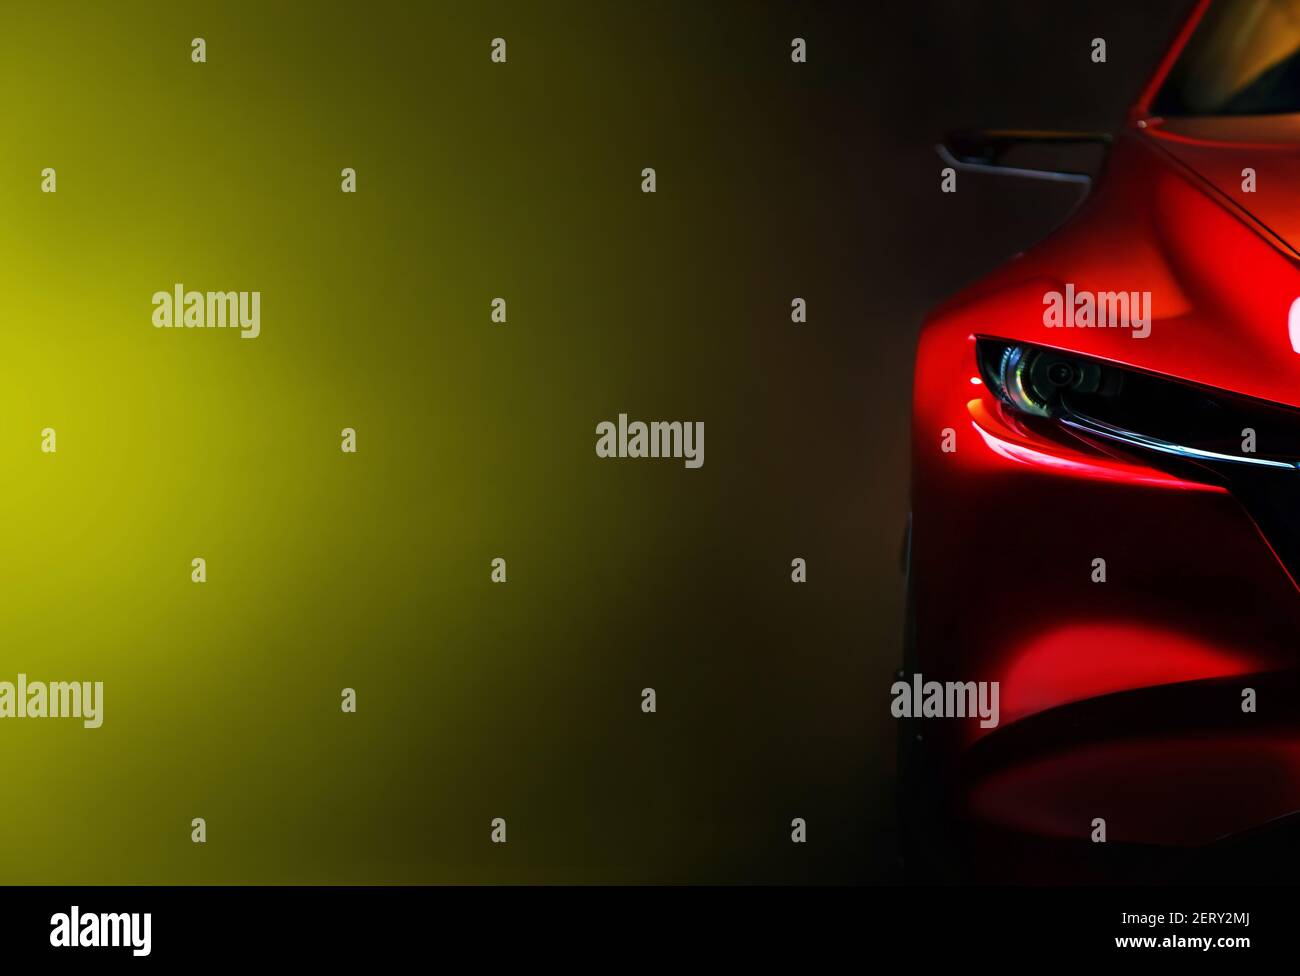 Red modern car headlights on black background, copy space Stock Photo